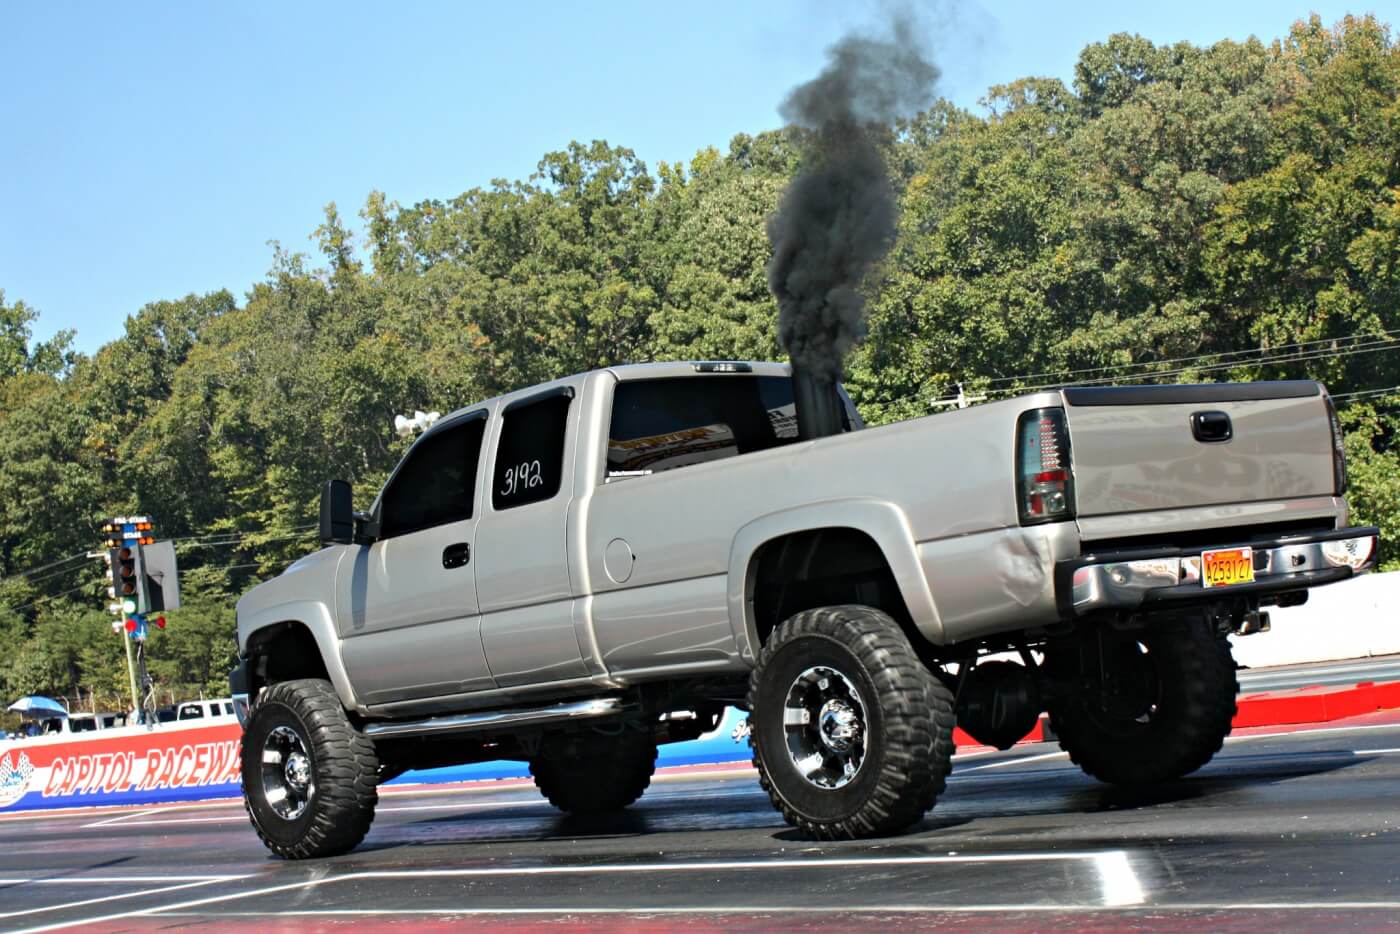 Lowered or lifted, diesel is diesel and a true bracket racer won’t care about the overall e/t as it just takes a consistent truck and quick reaction time to win rounds. 